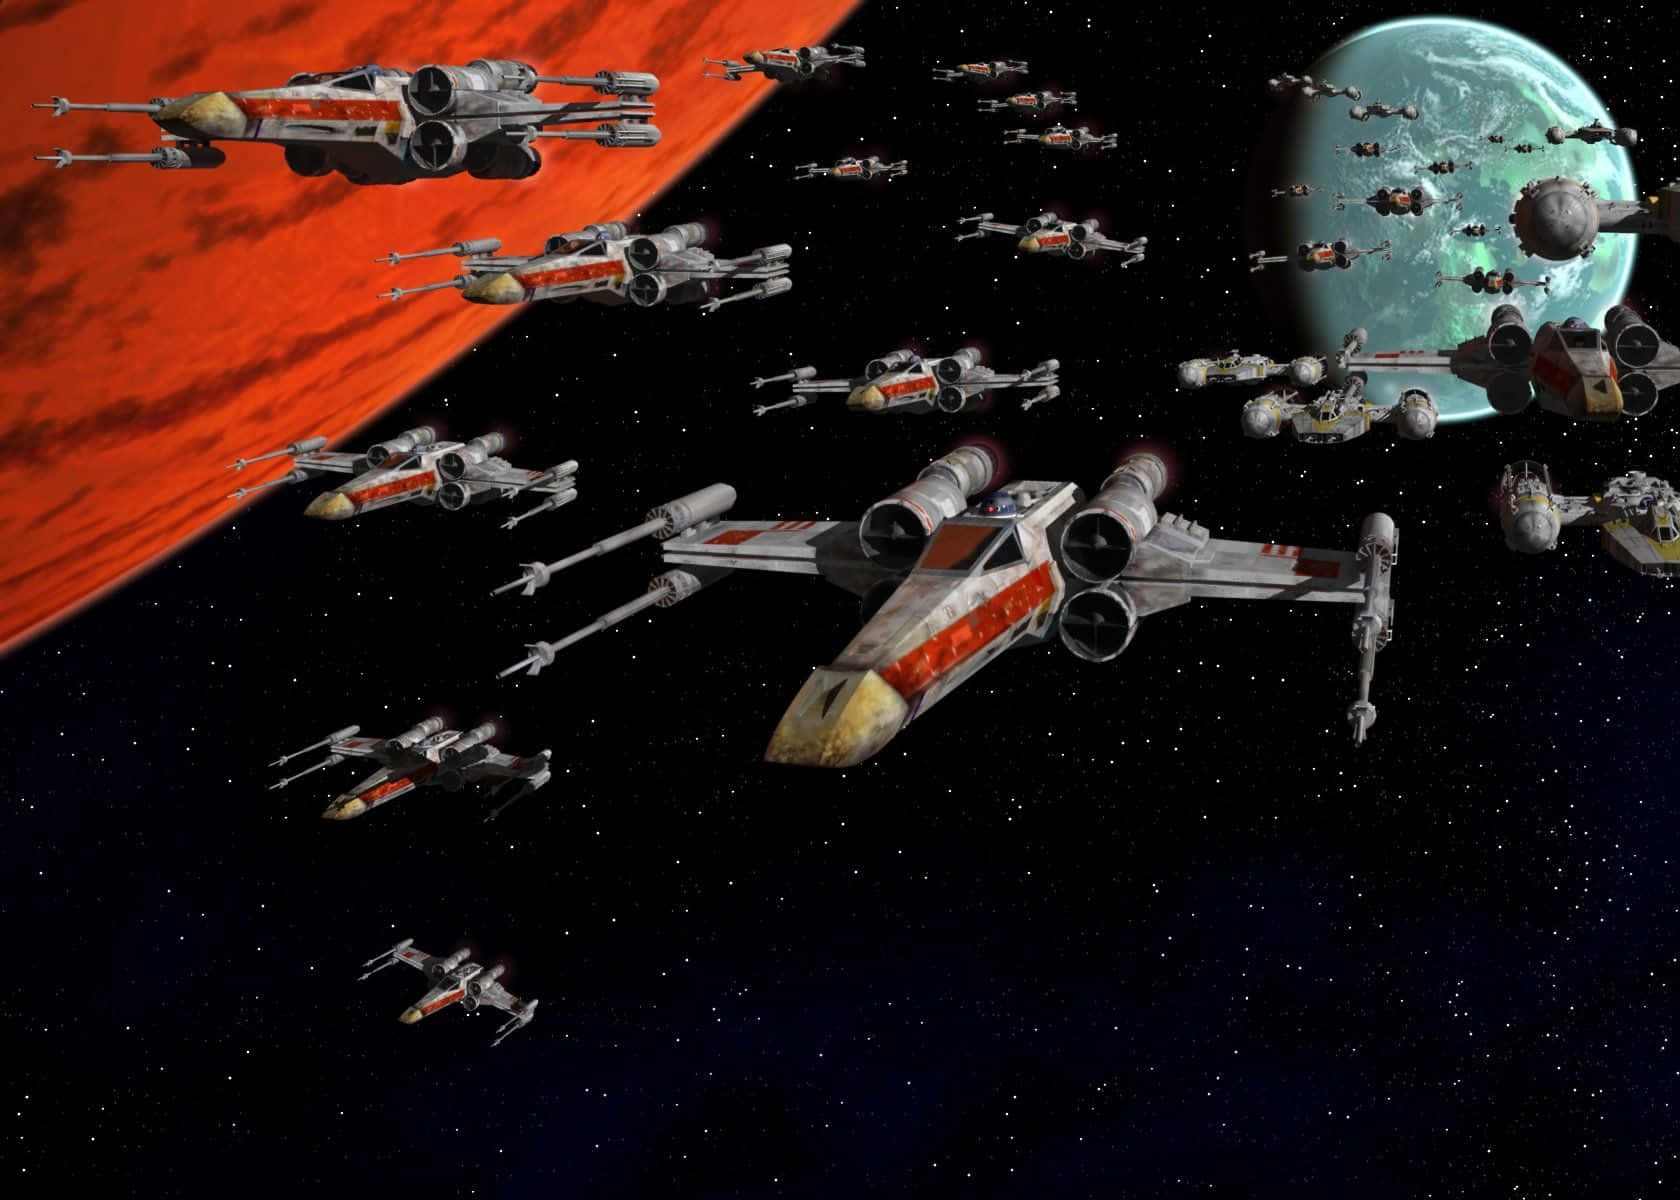 An Epic Battle between Tie and X-wing Fighters Wallpaper